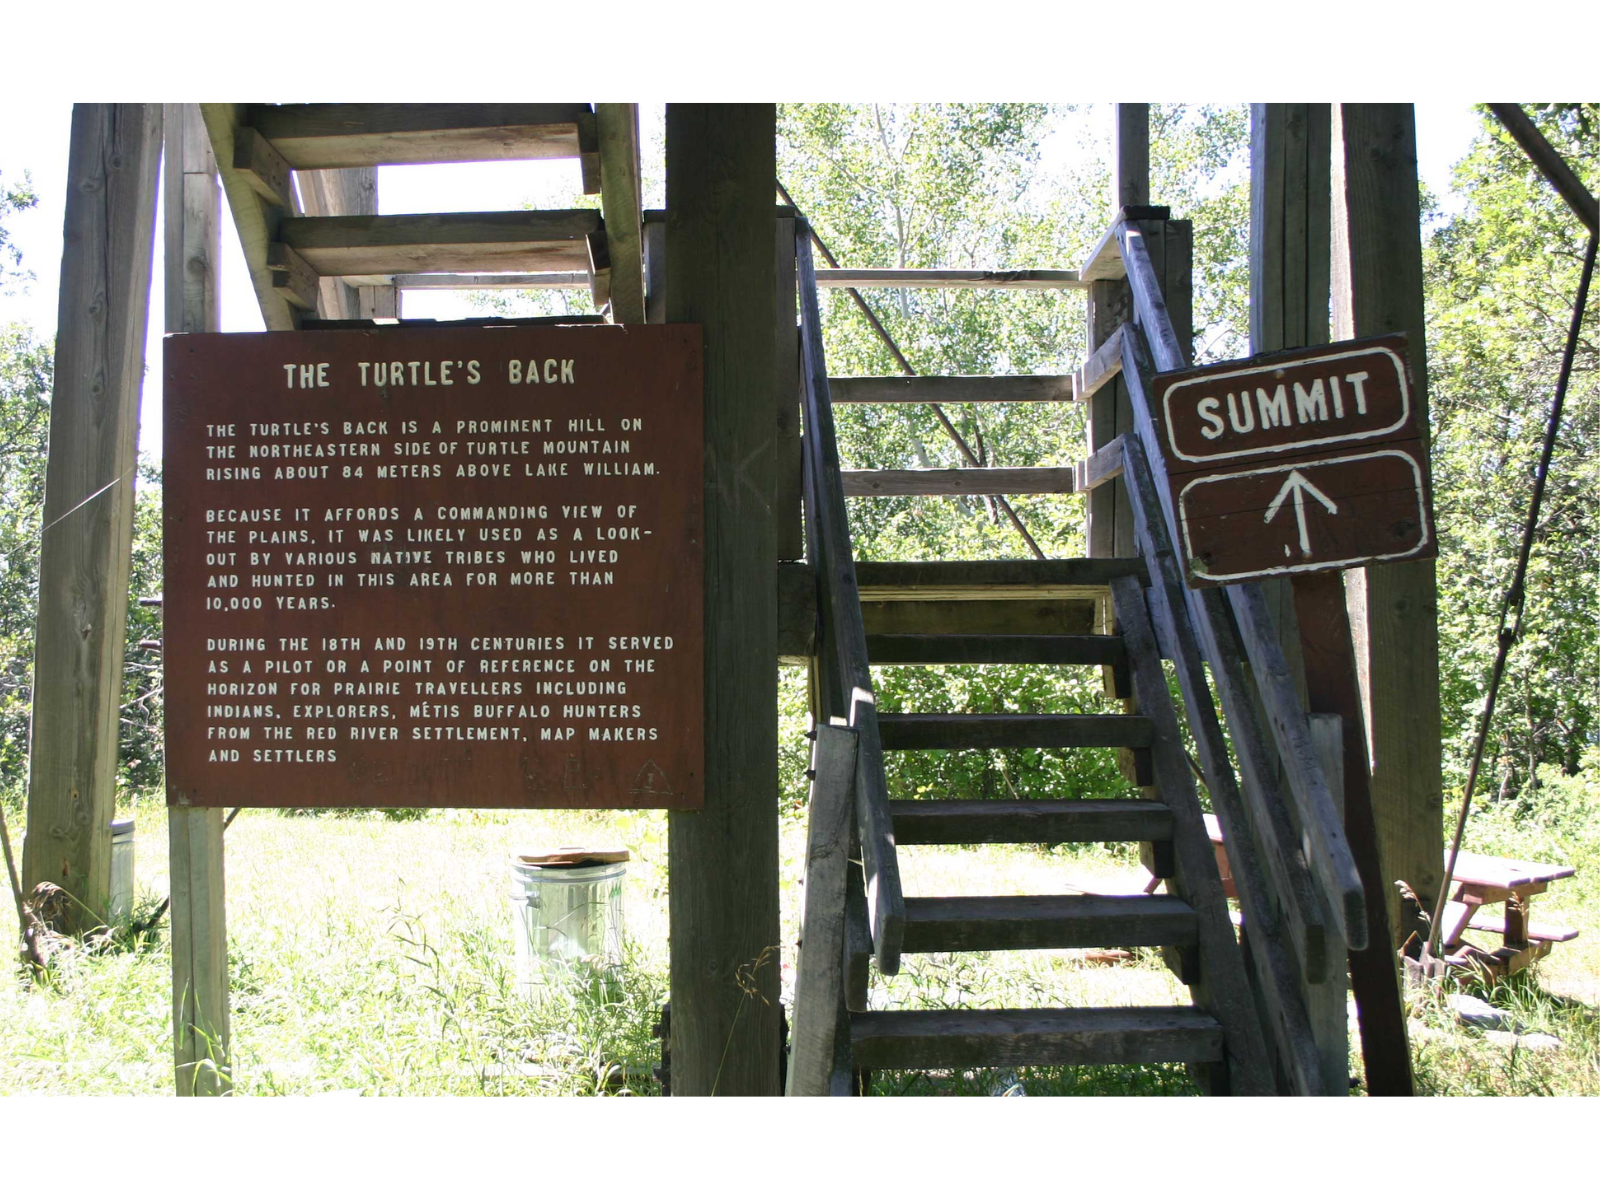 Standing at the base of a set of wooden outdoor stairs. Either side of the staircase are wooden signs. One reads "Summit" with an arrow pointing up, and the other is an information panel about "The Turtle's Back".